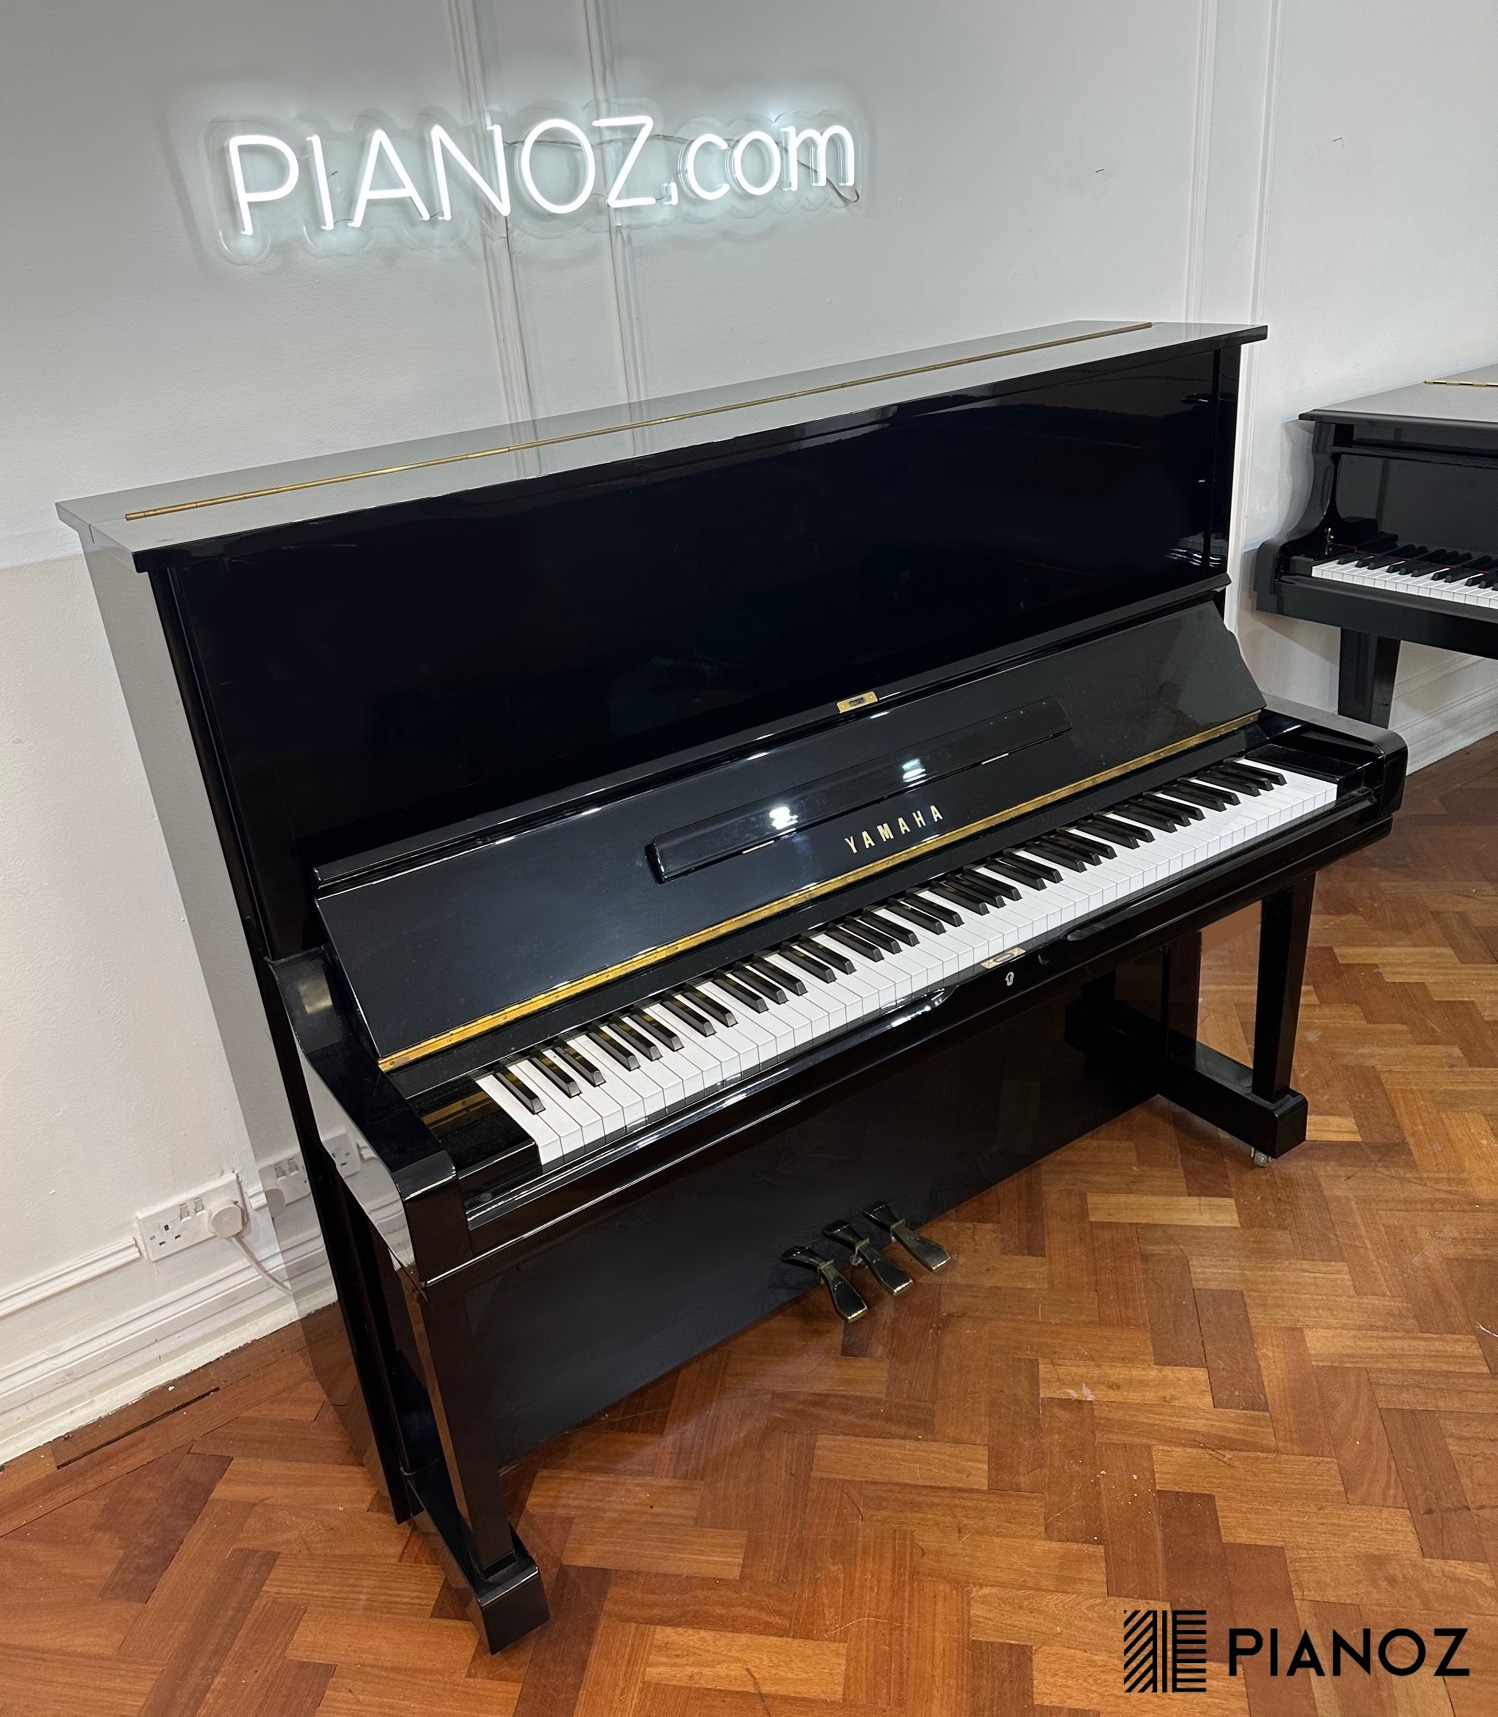 Yamaha SU131 Concert Upright Piano piano for sale in UK